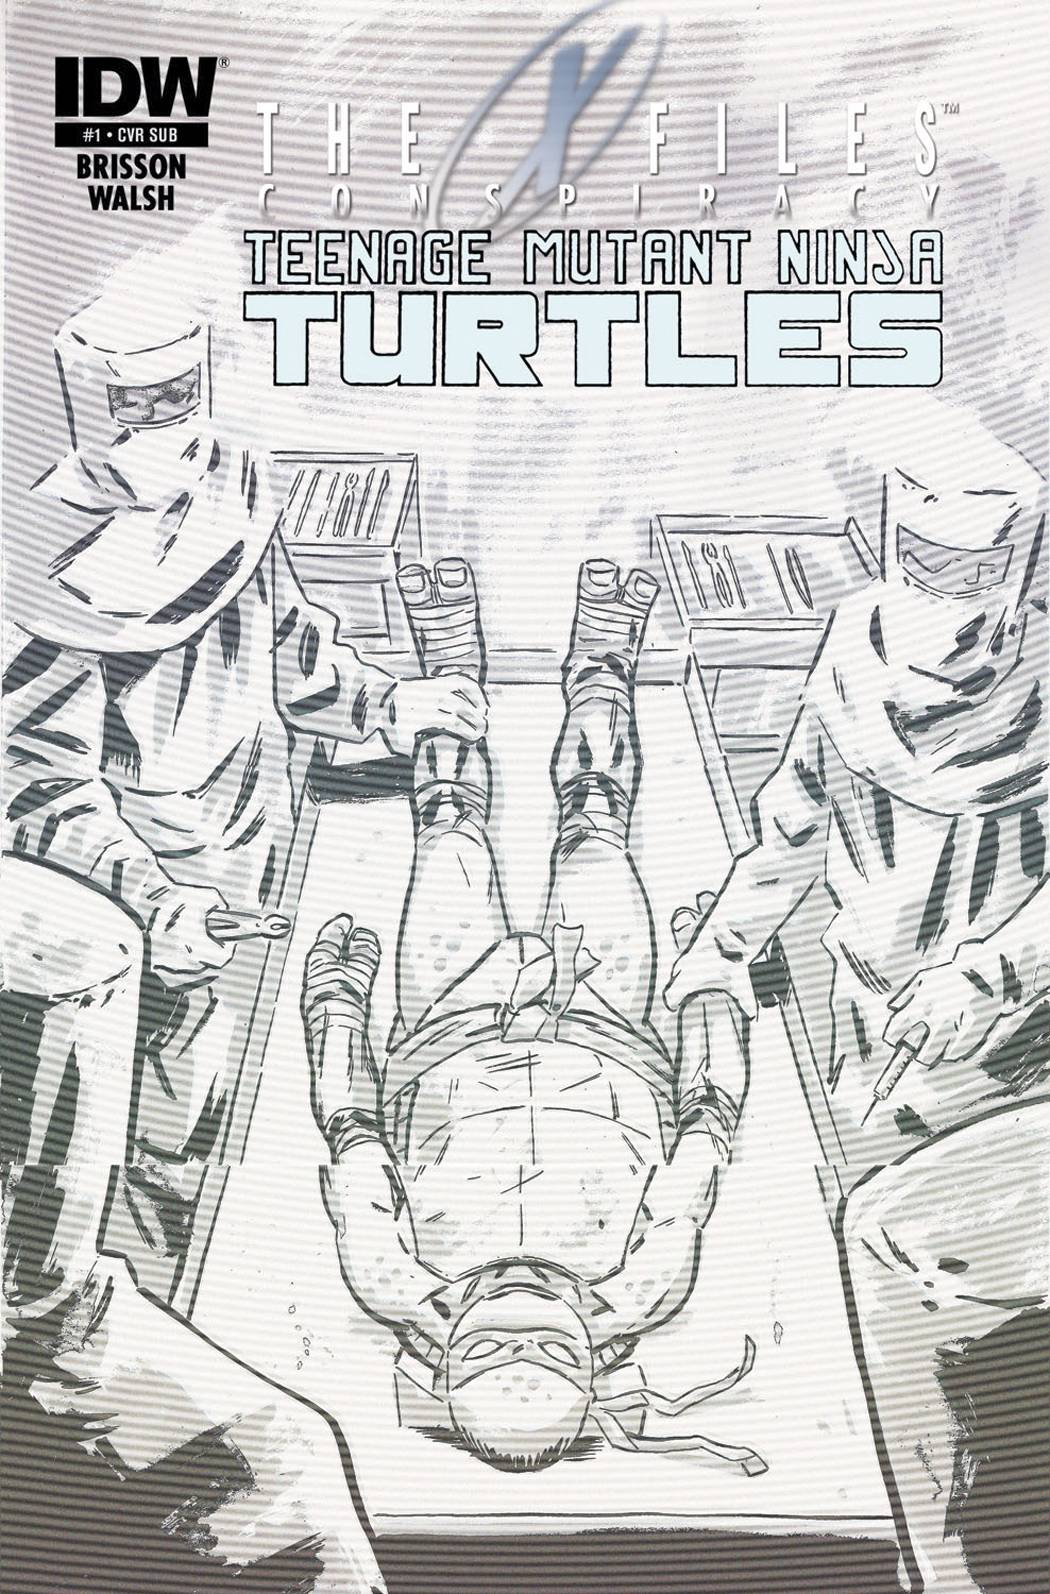 X-FILES CONSPIRACY TMNT #1 SUBSCRIPTION VARIANT